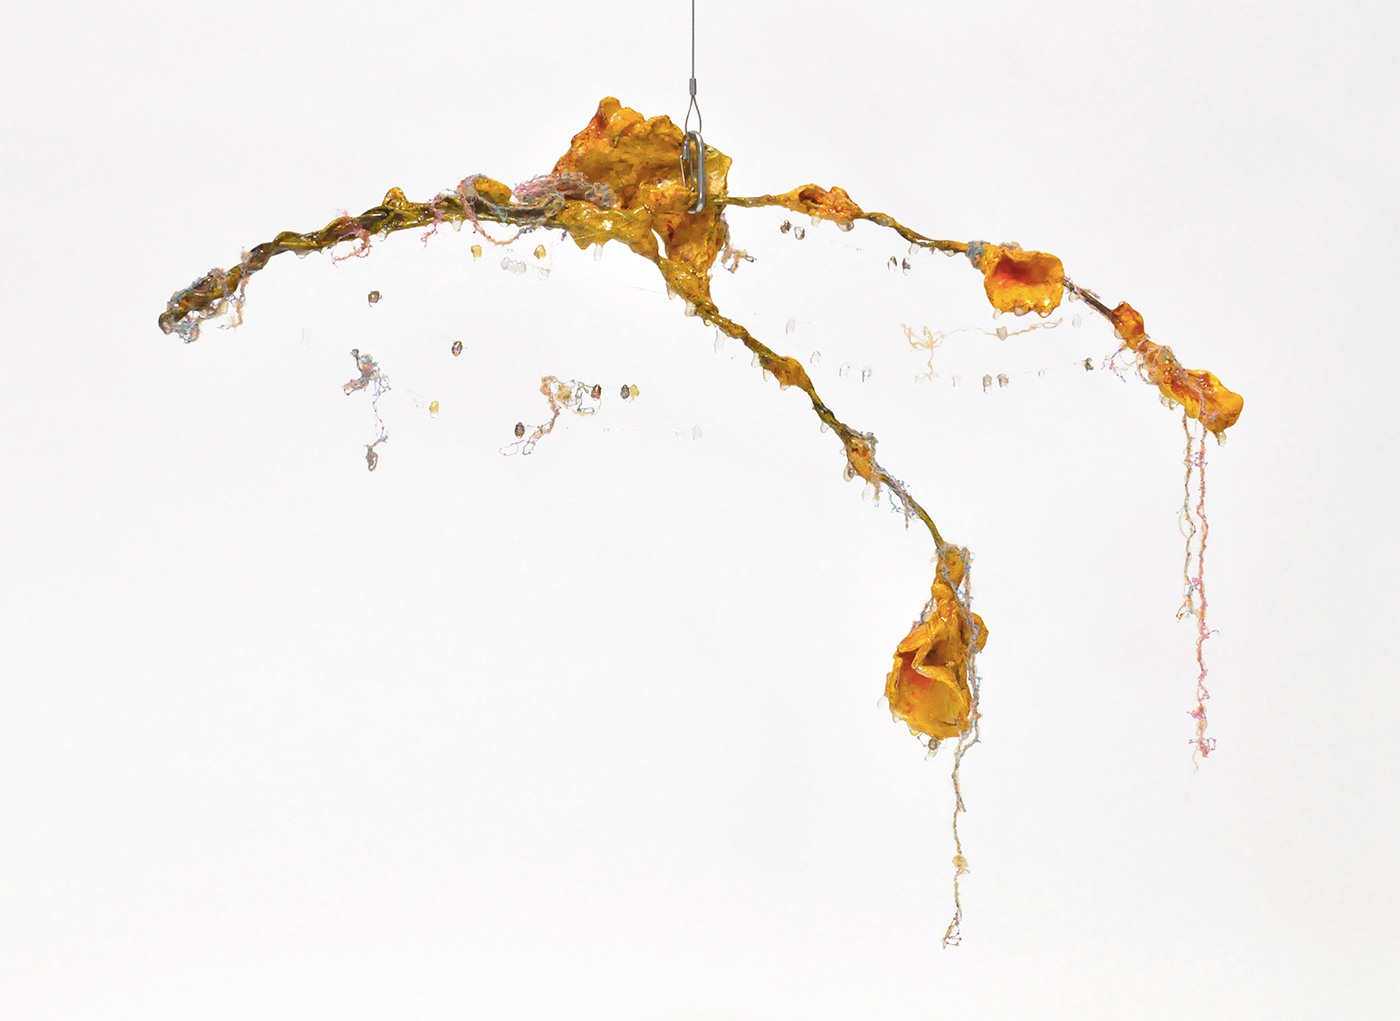 Branch [#SS21SC002] 2021, Oil, Glue, Resin, Yarn, Nylon Wire, Glass Beads, and Stone Powder Clay on Steel Wire, 13 x 20 x 2.5 in. / 32 x 50 x 6 cm